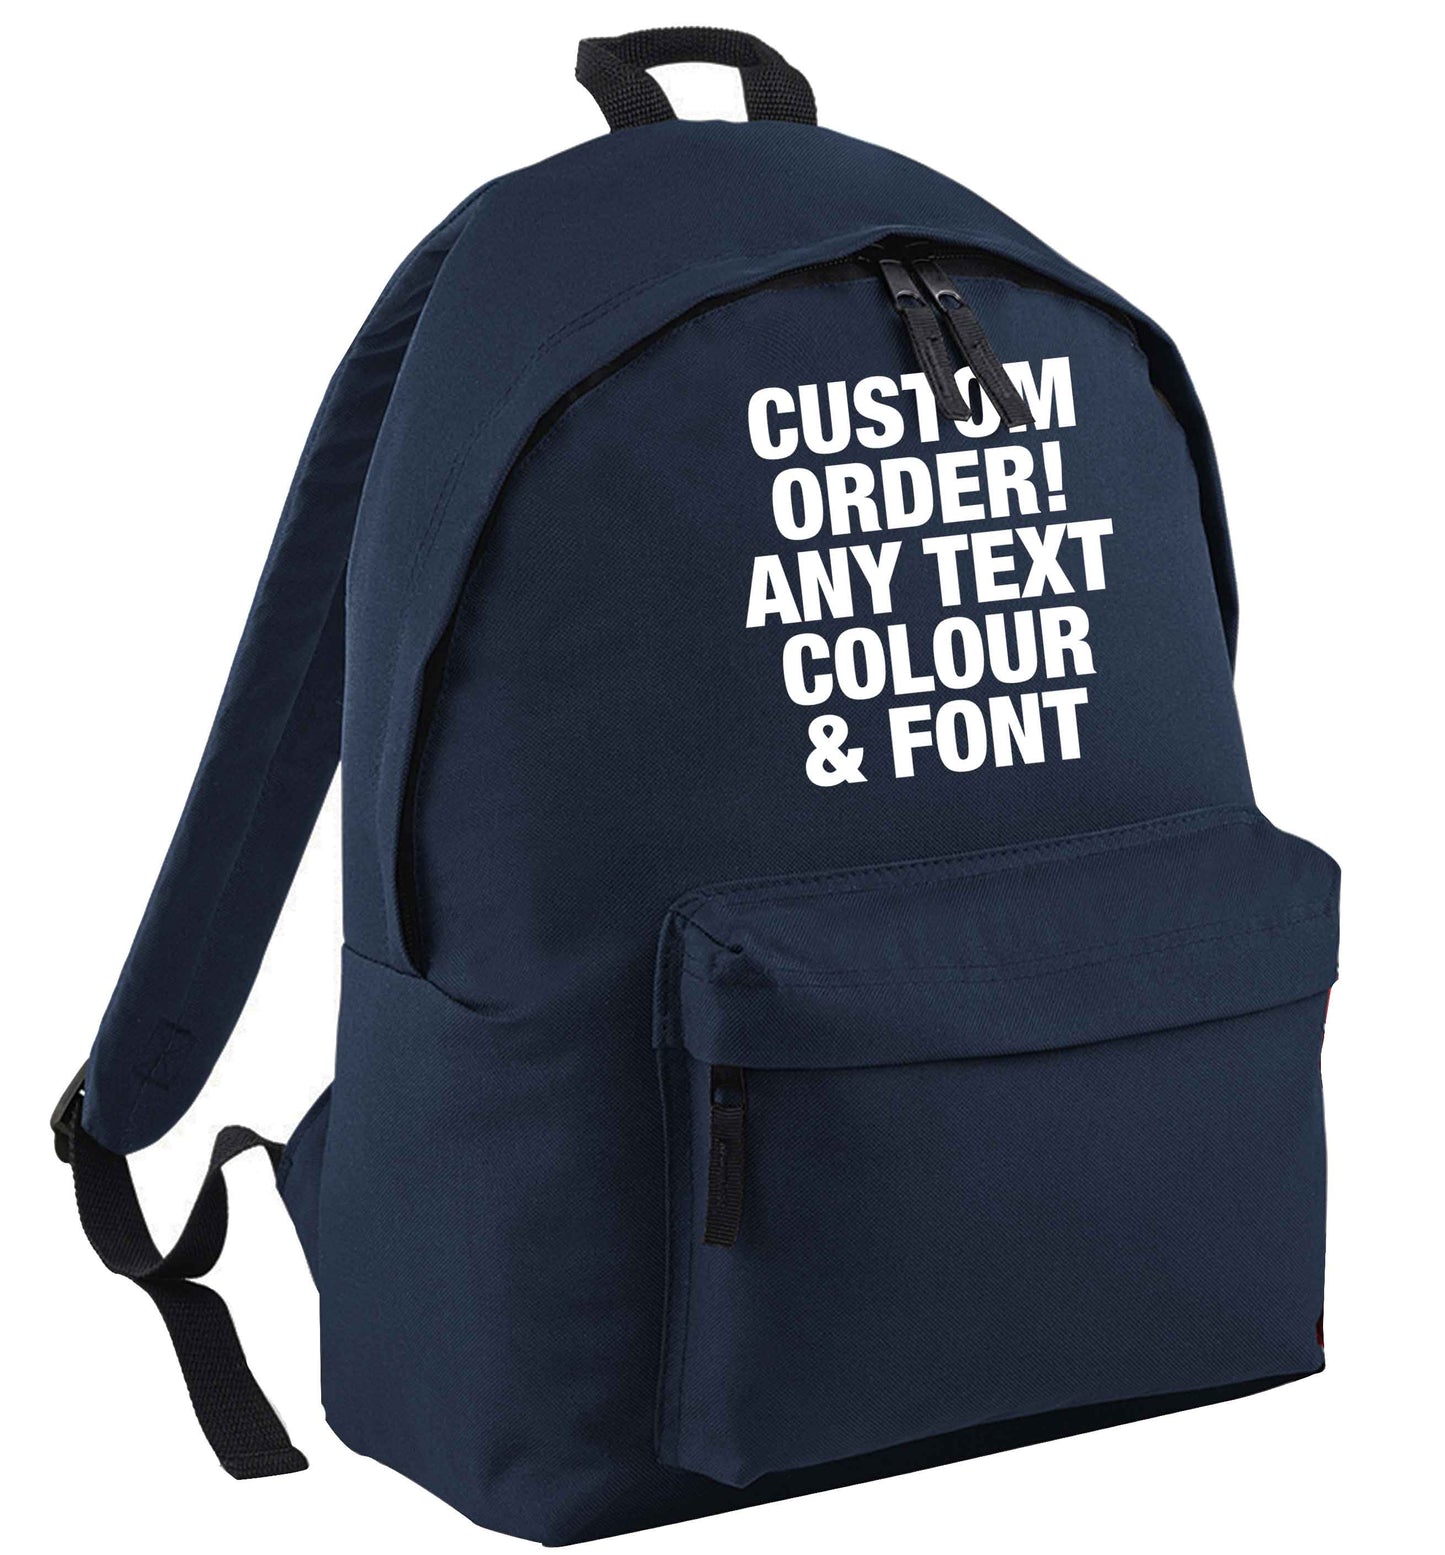 Custom order any text colour and font navy adults backpack